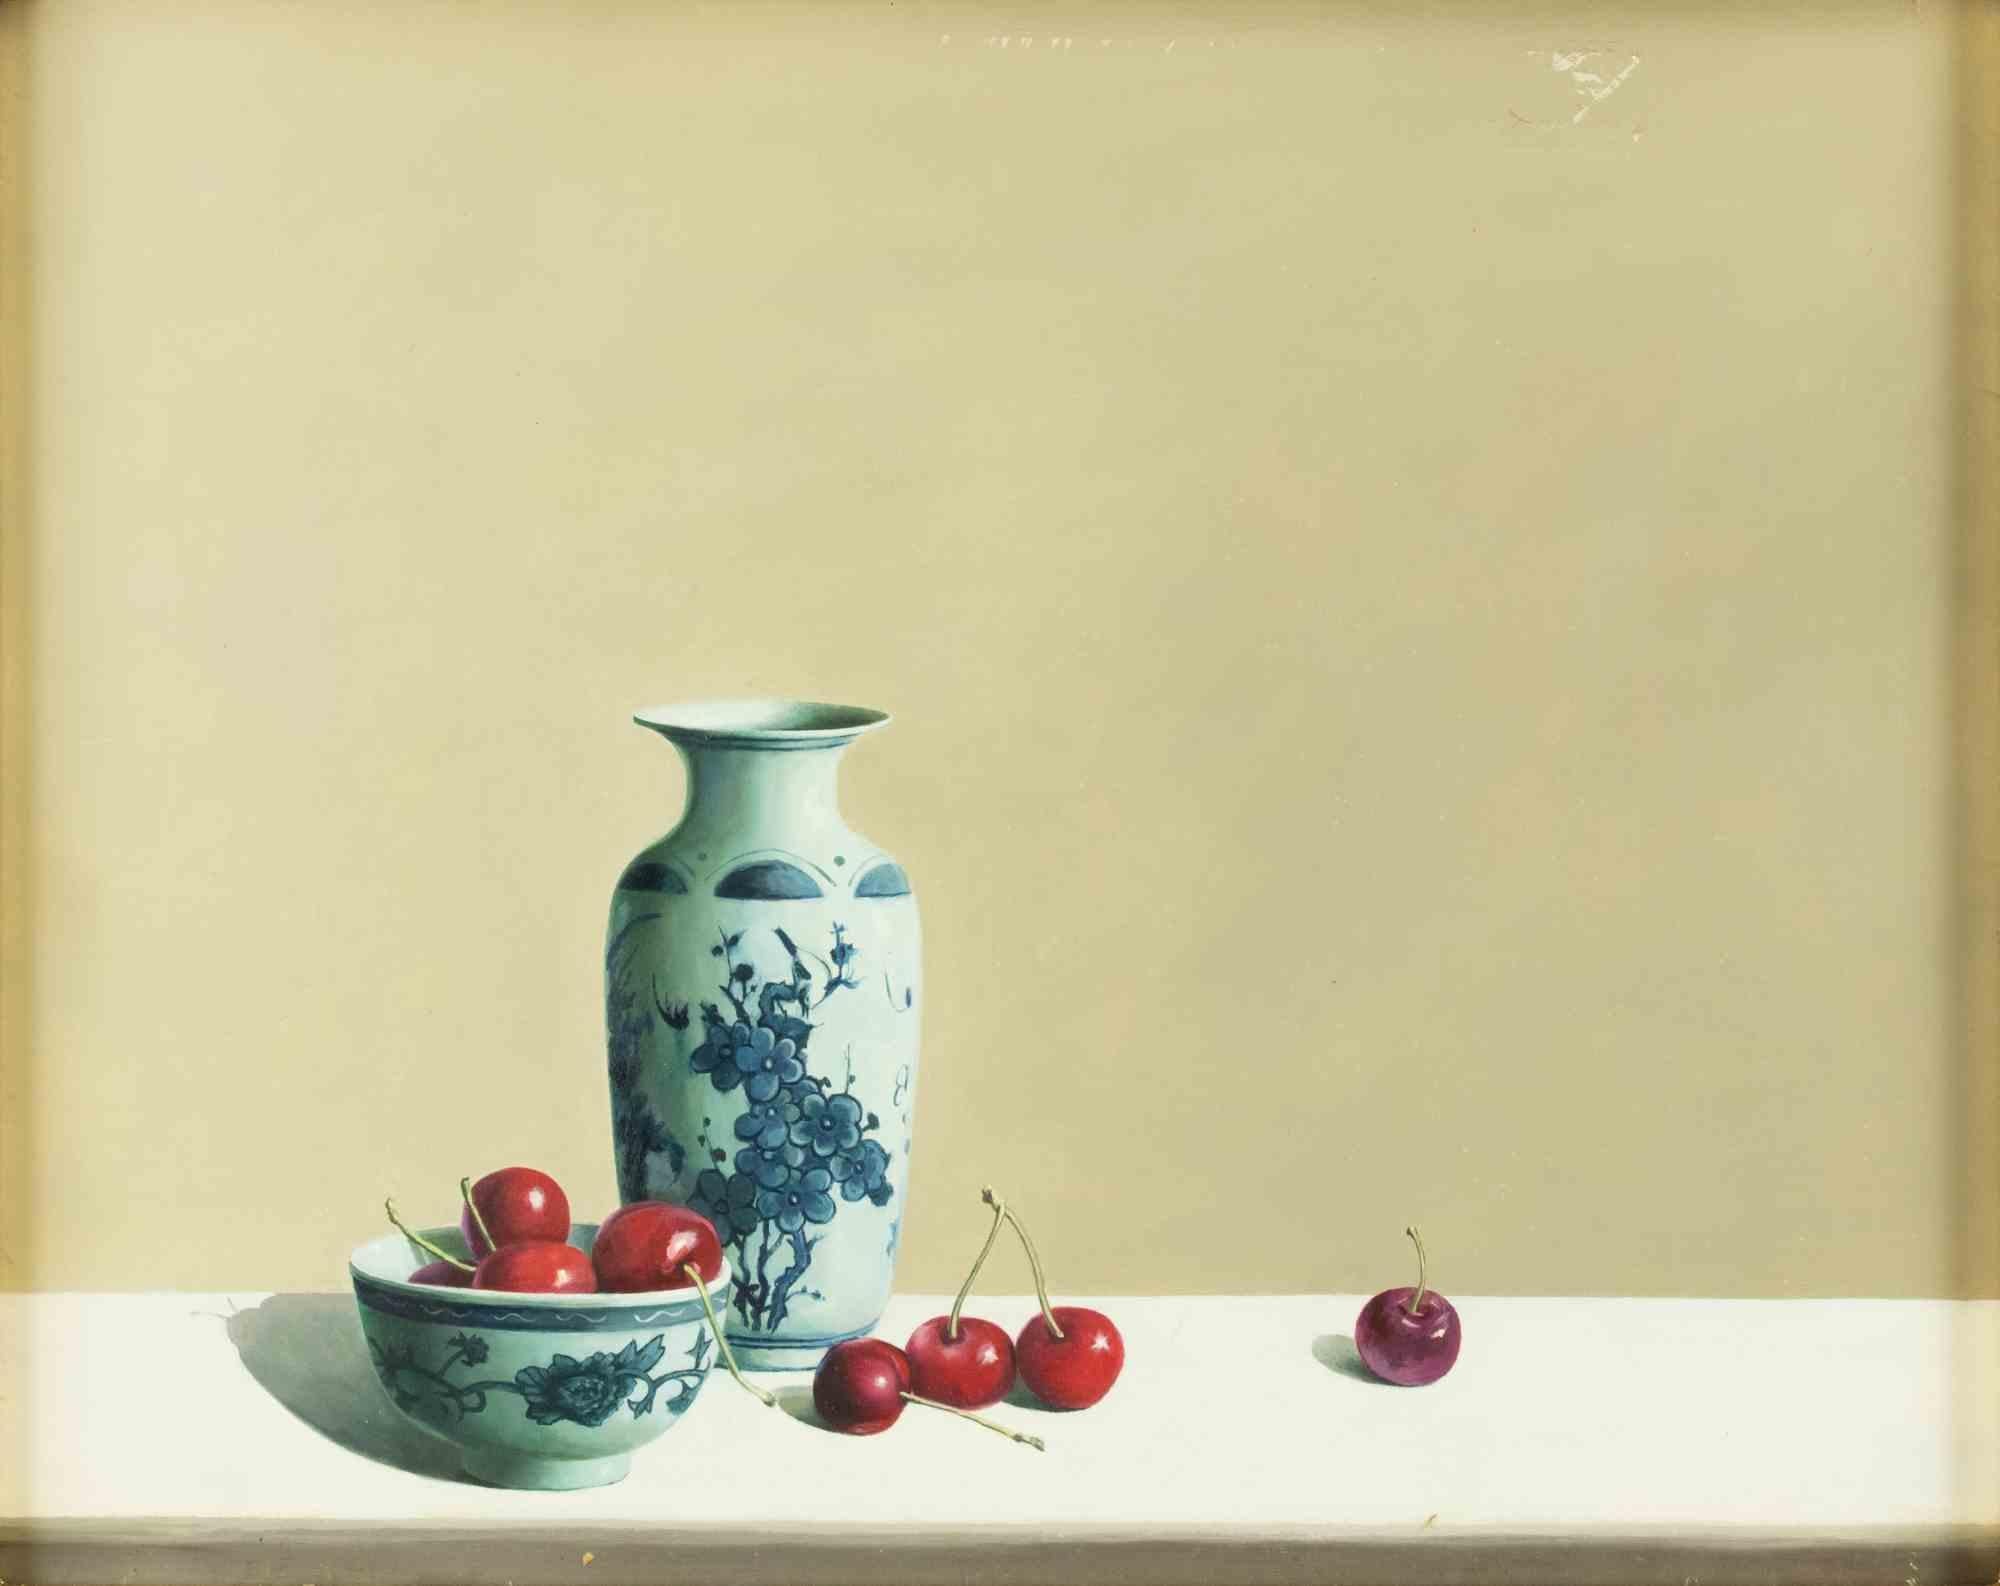 Still Life is an original oil painting realized  by Zhang Wei Guang (Mirror) in 2000s.

Includes frame.

Very Good conditions.

Zhang Wei Guang , also called ‘mirror' was born in Helong Jang, China in 1968. Having made a deep formative research